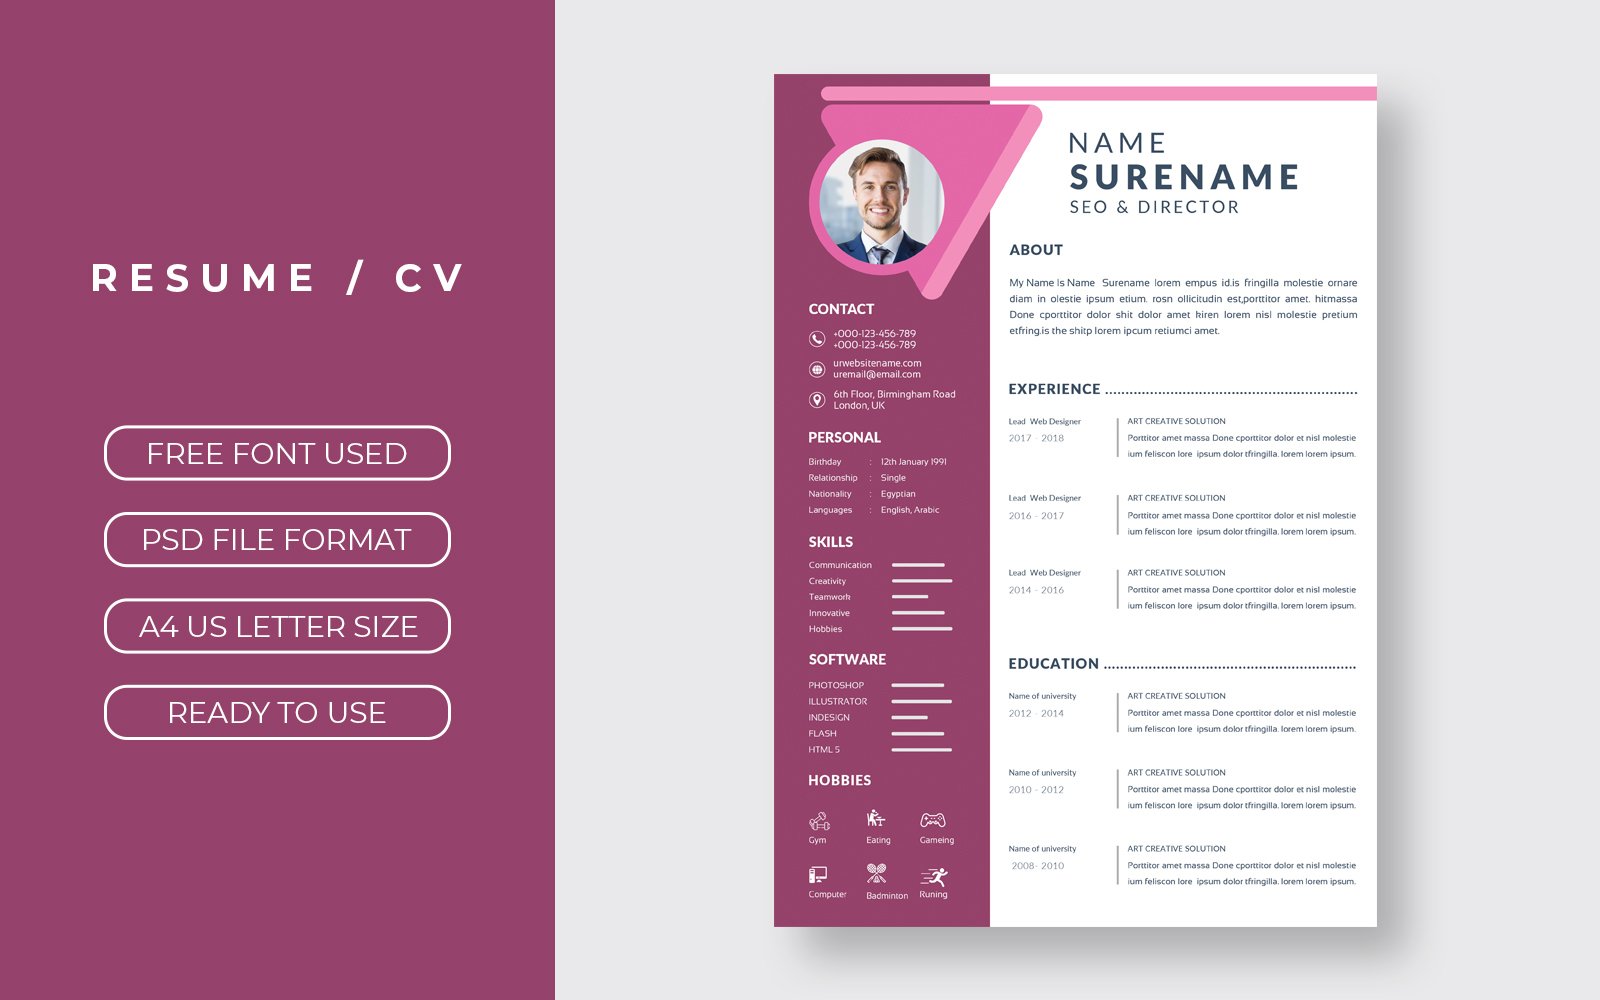 Template #254824 Professional Resume Webdesign Template - Logo template Preview